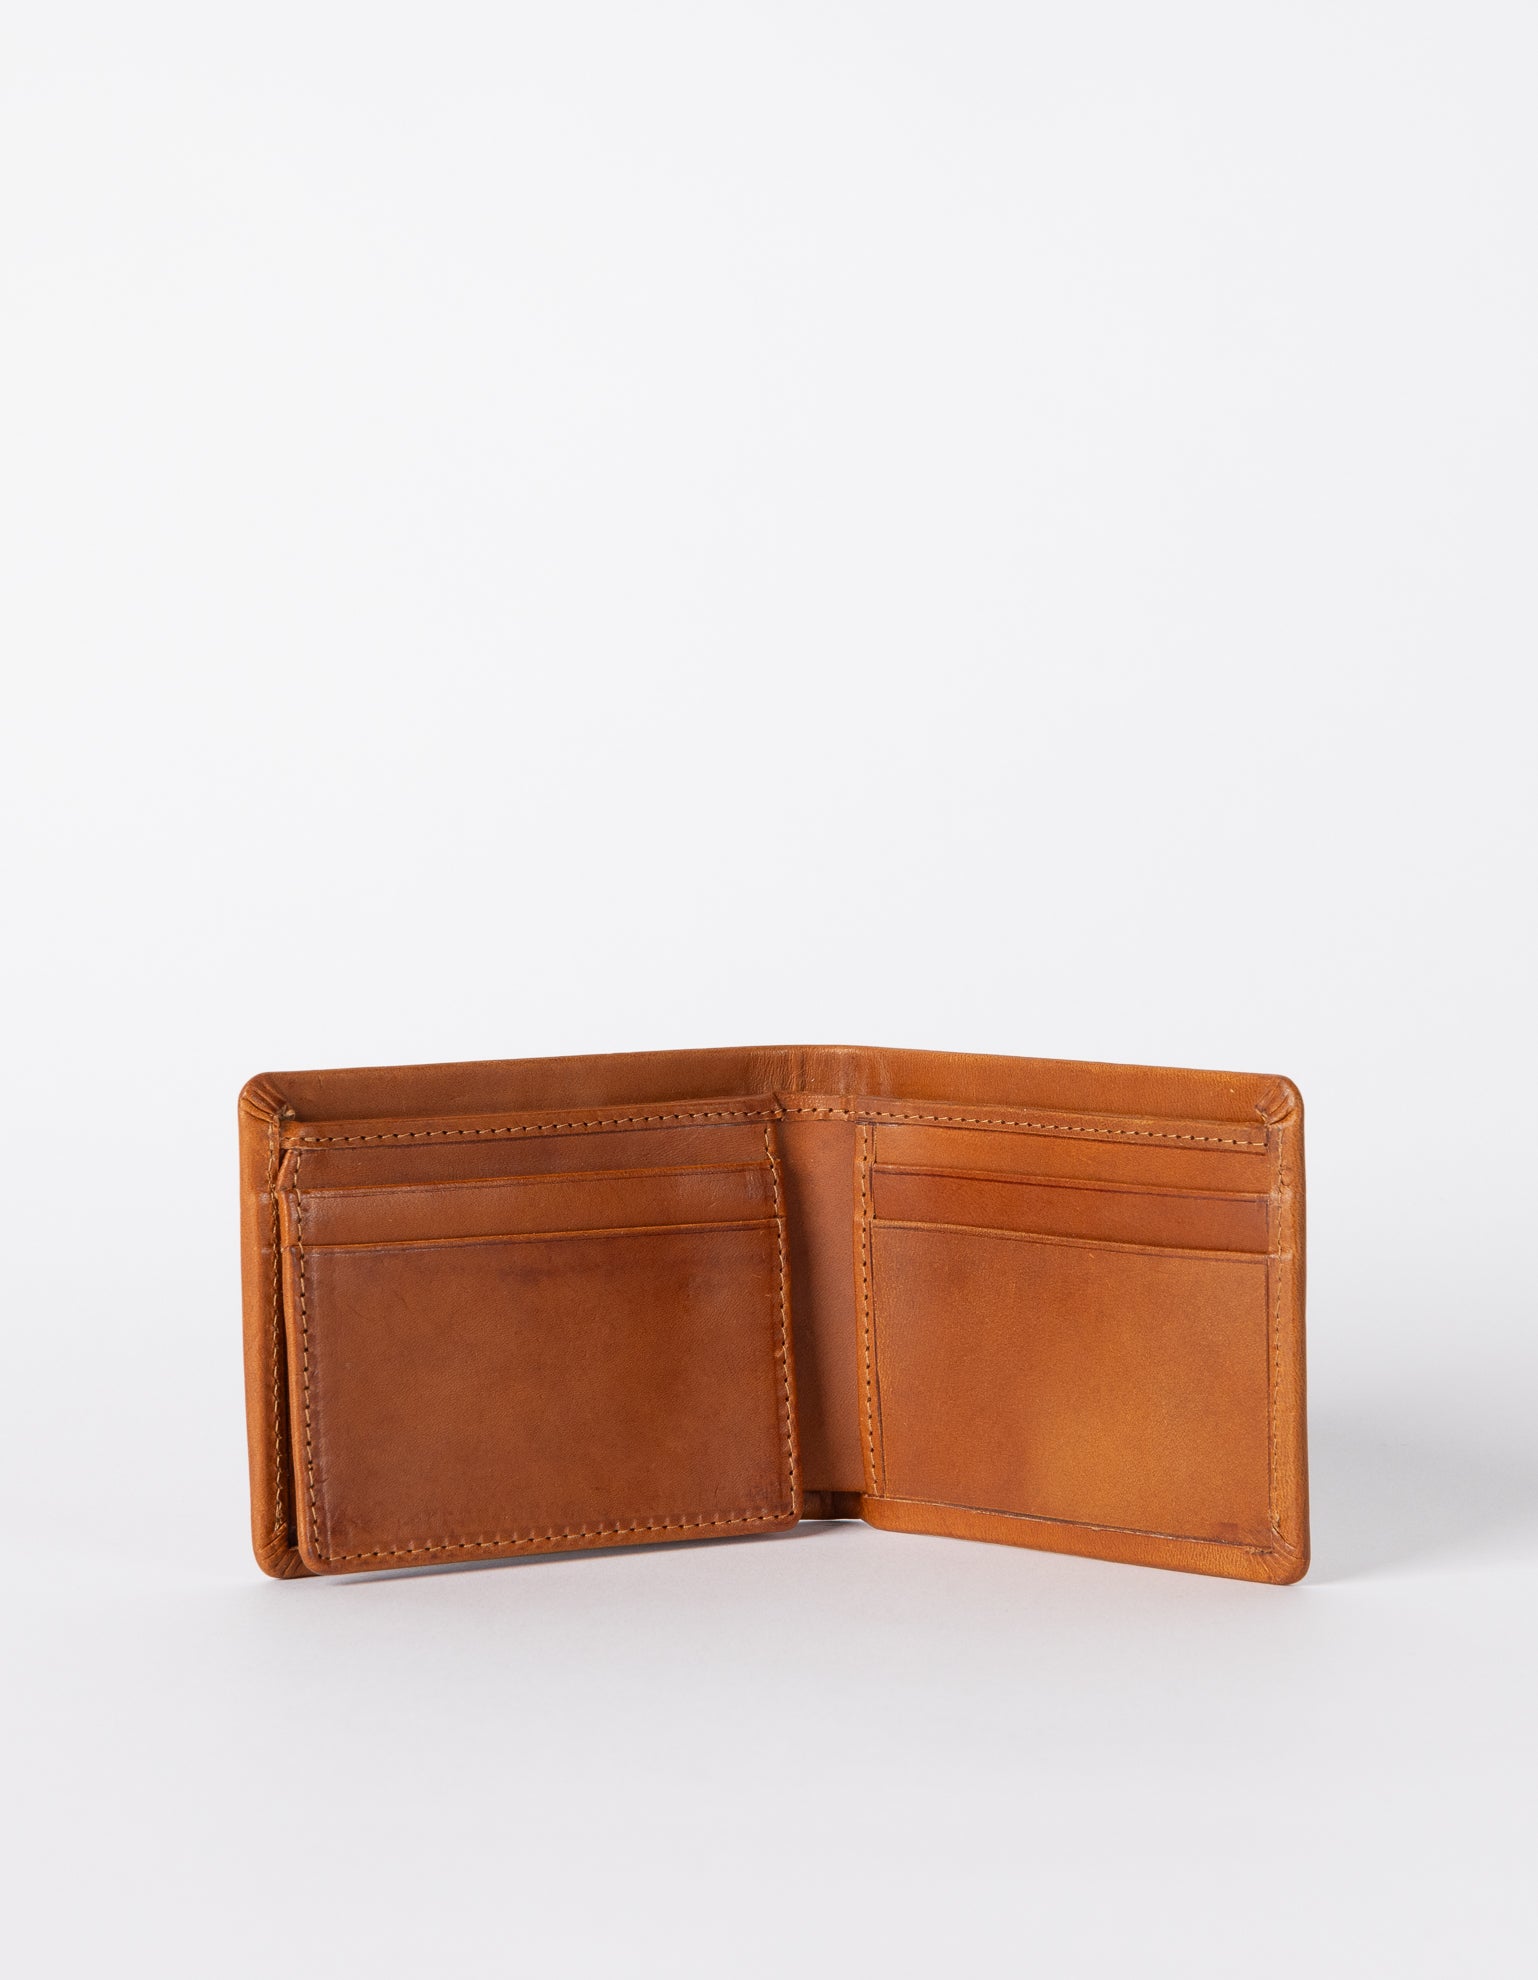 Cognac Leather fold over wallet. Square shape. Inside product image.